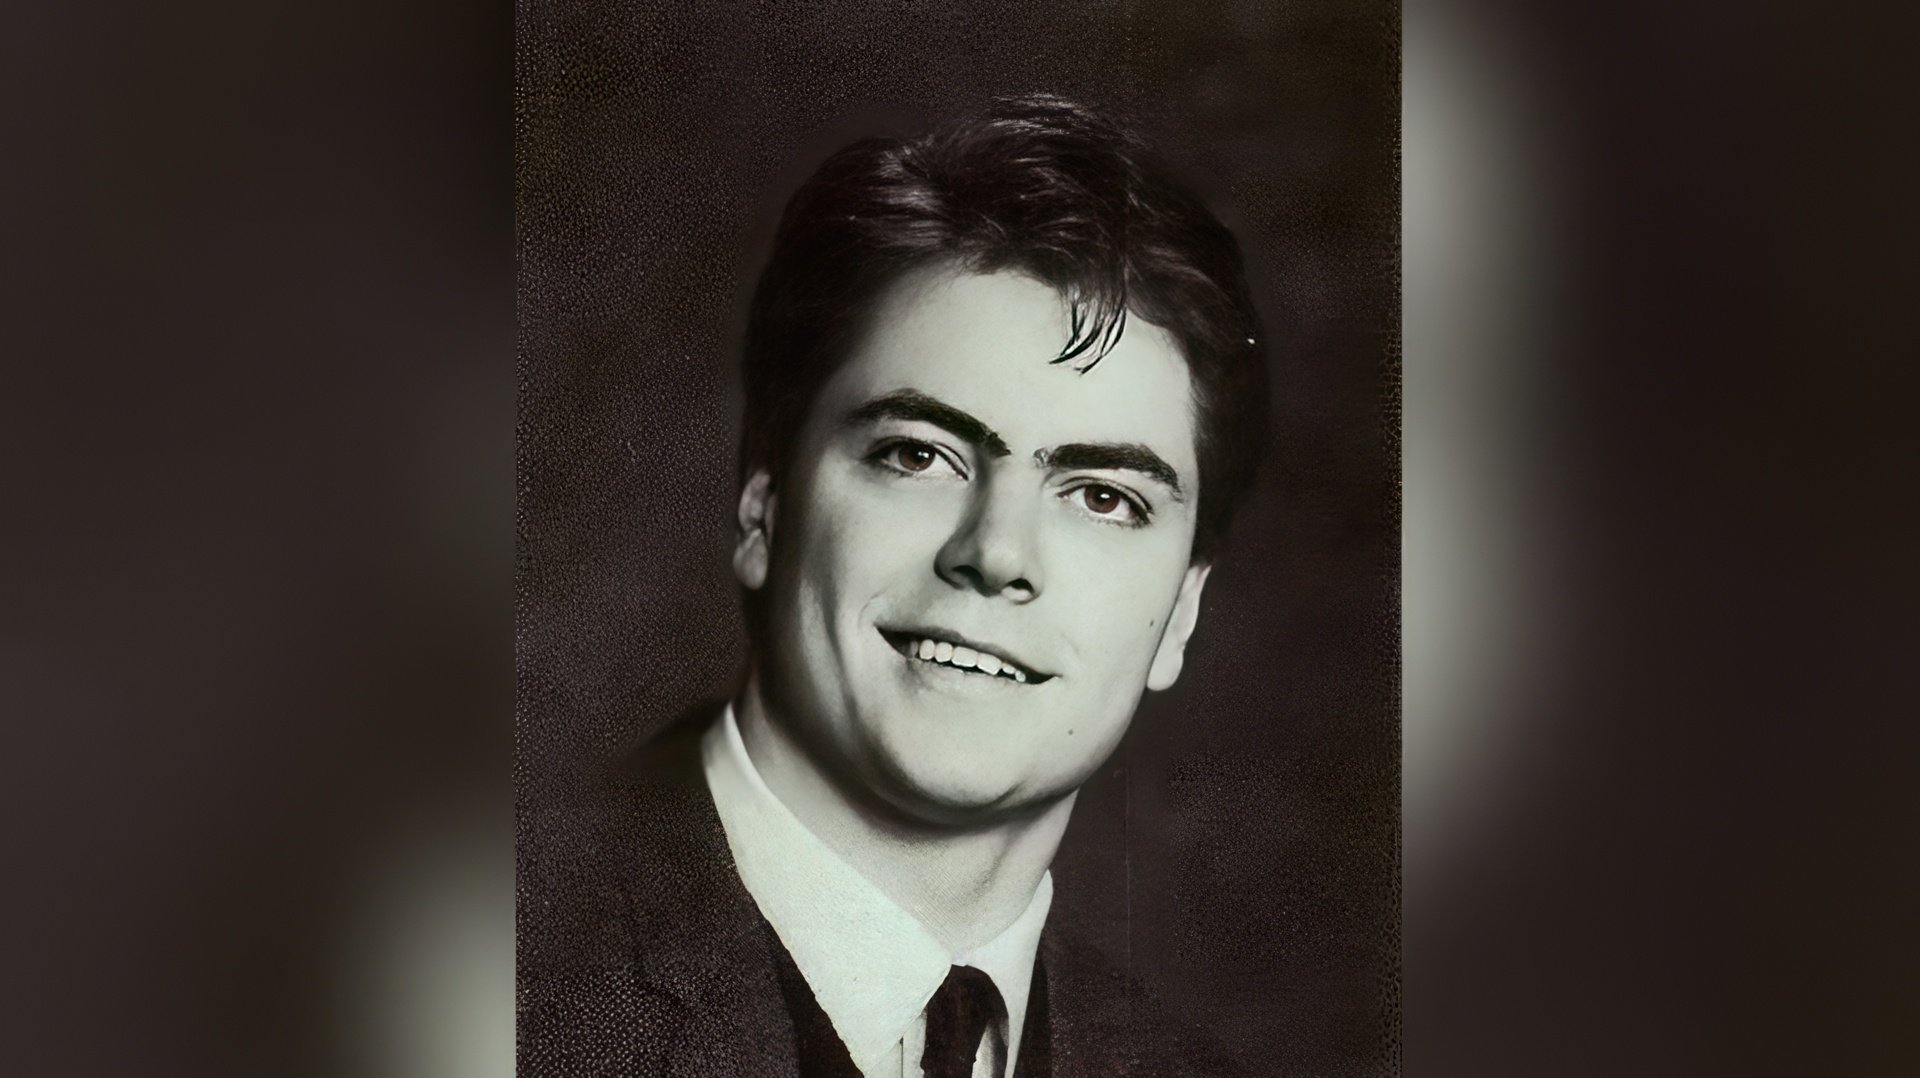 Nick Offerman in his youth